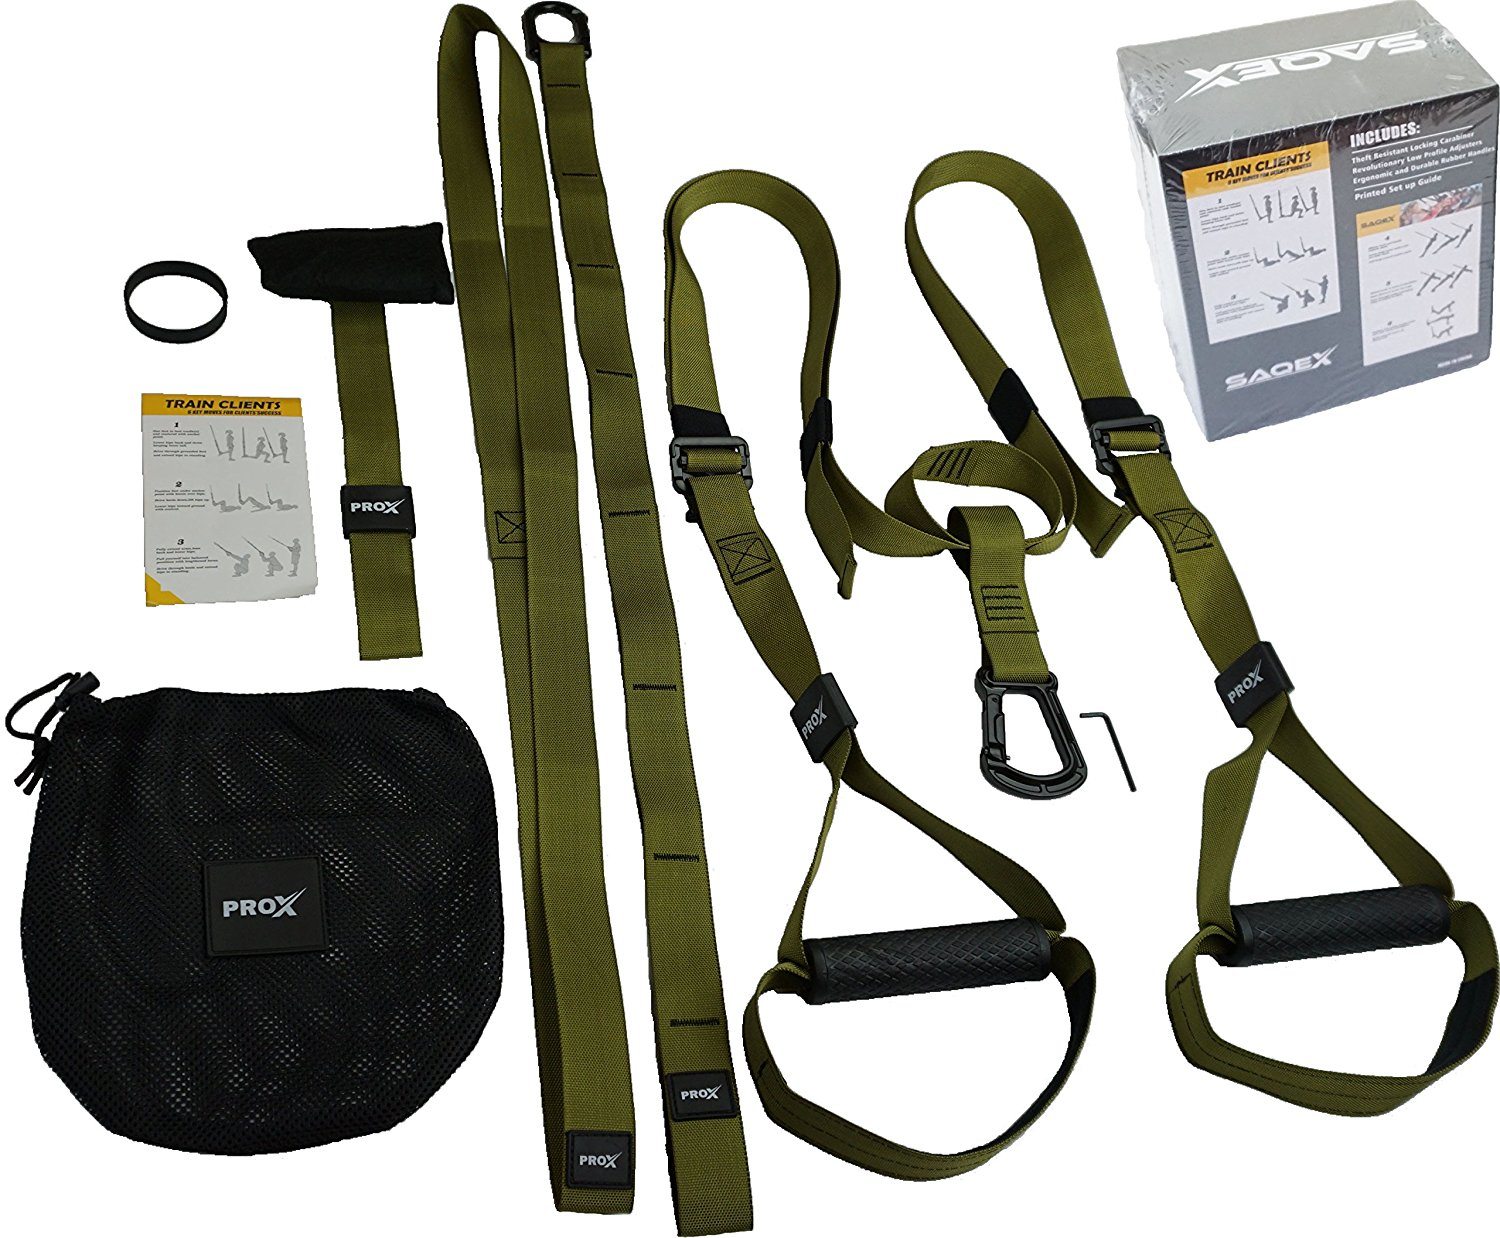 Small Space Home Fitness Equipment For Your Apartment | Body Weight Resistance Straps & Anchors